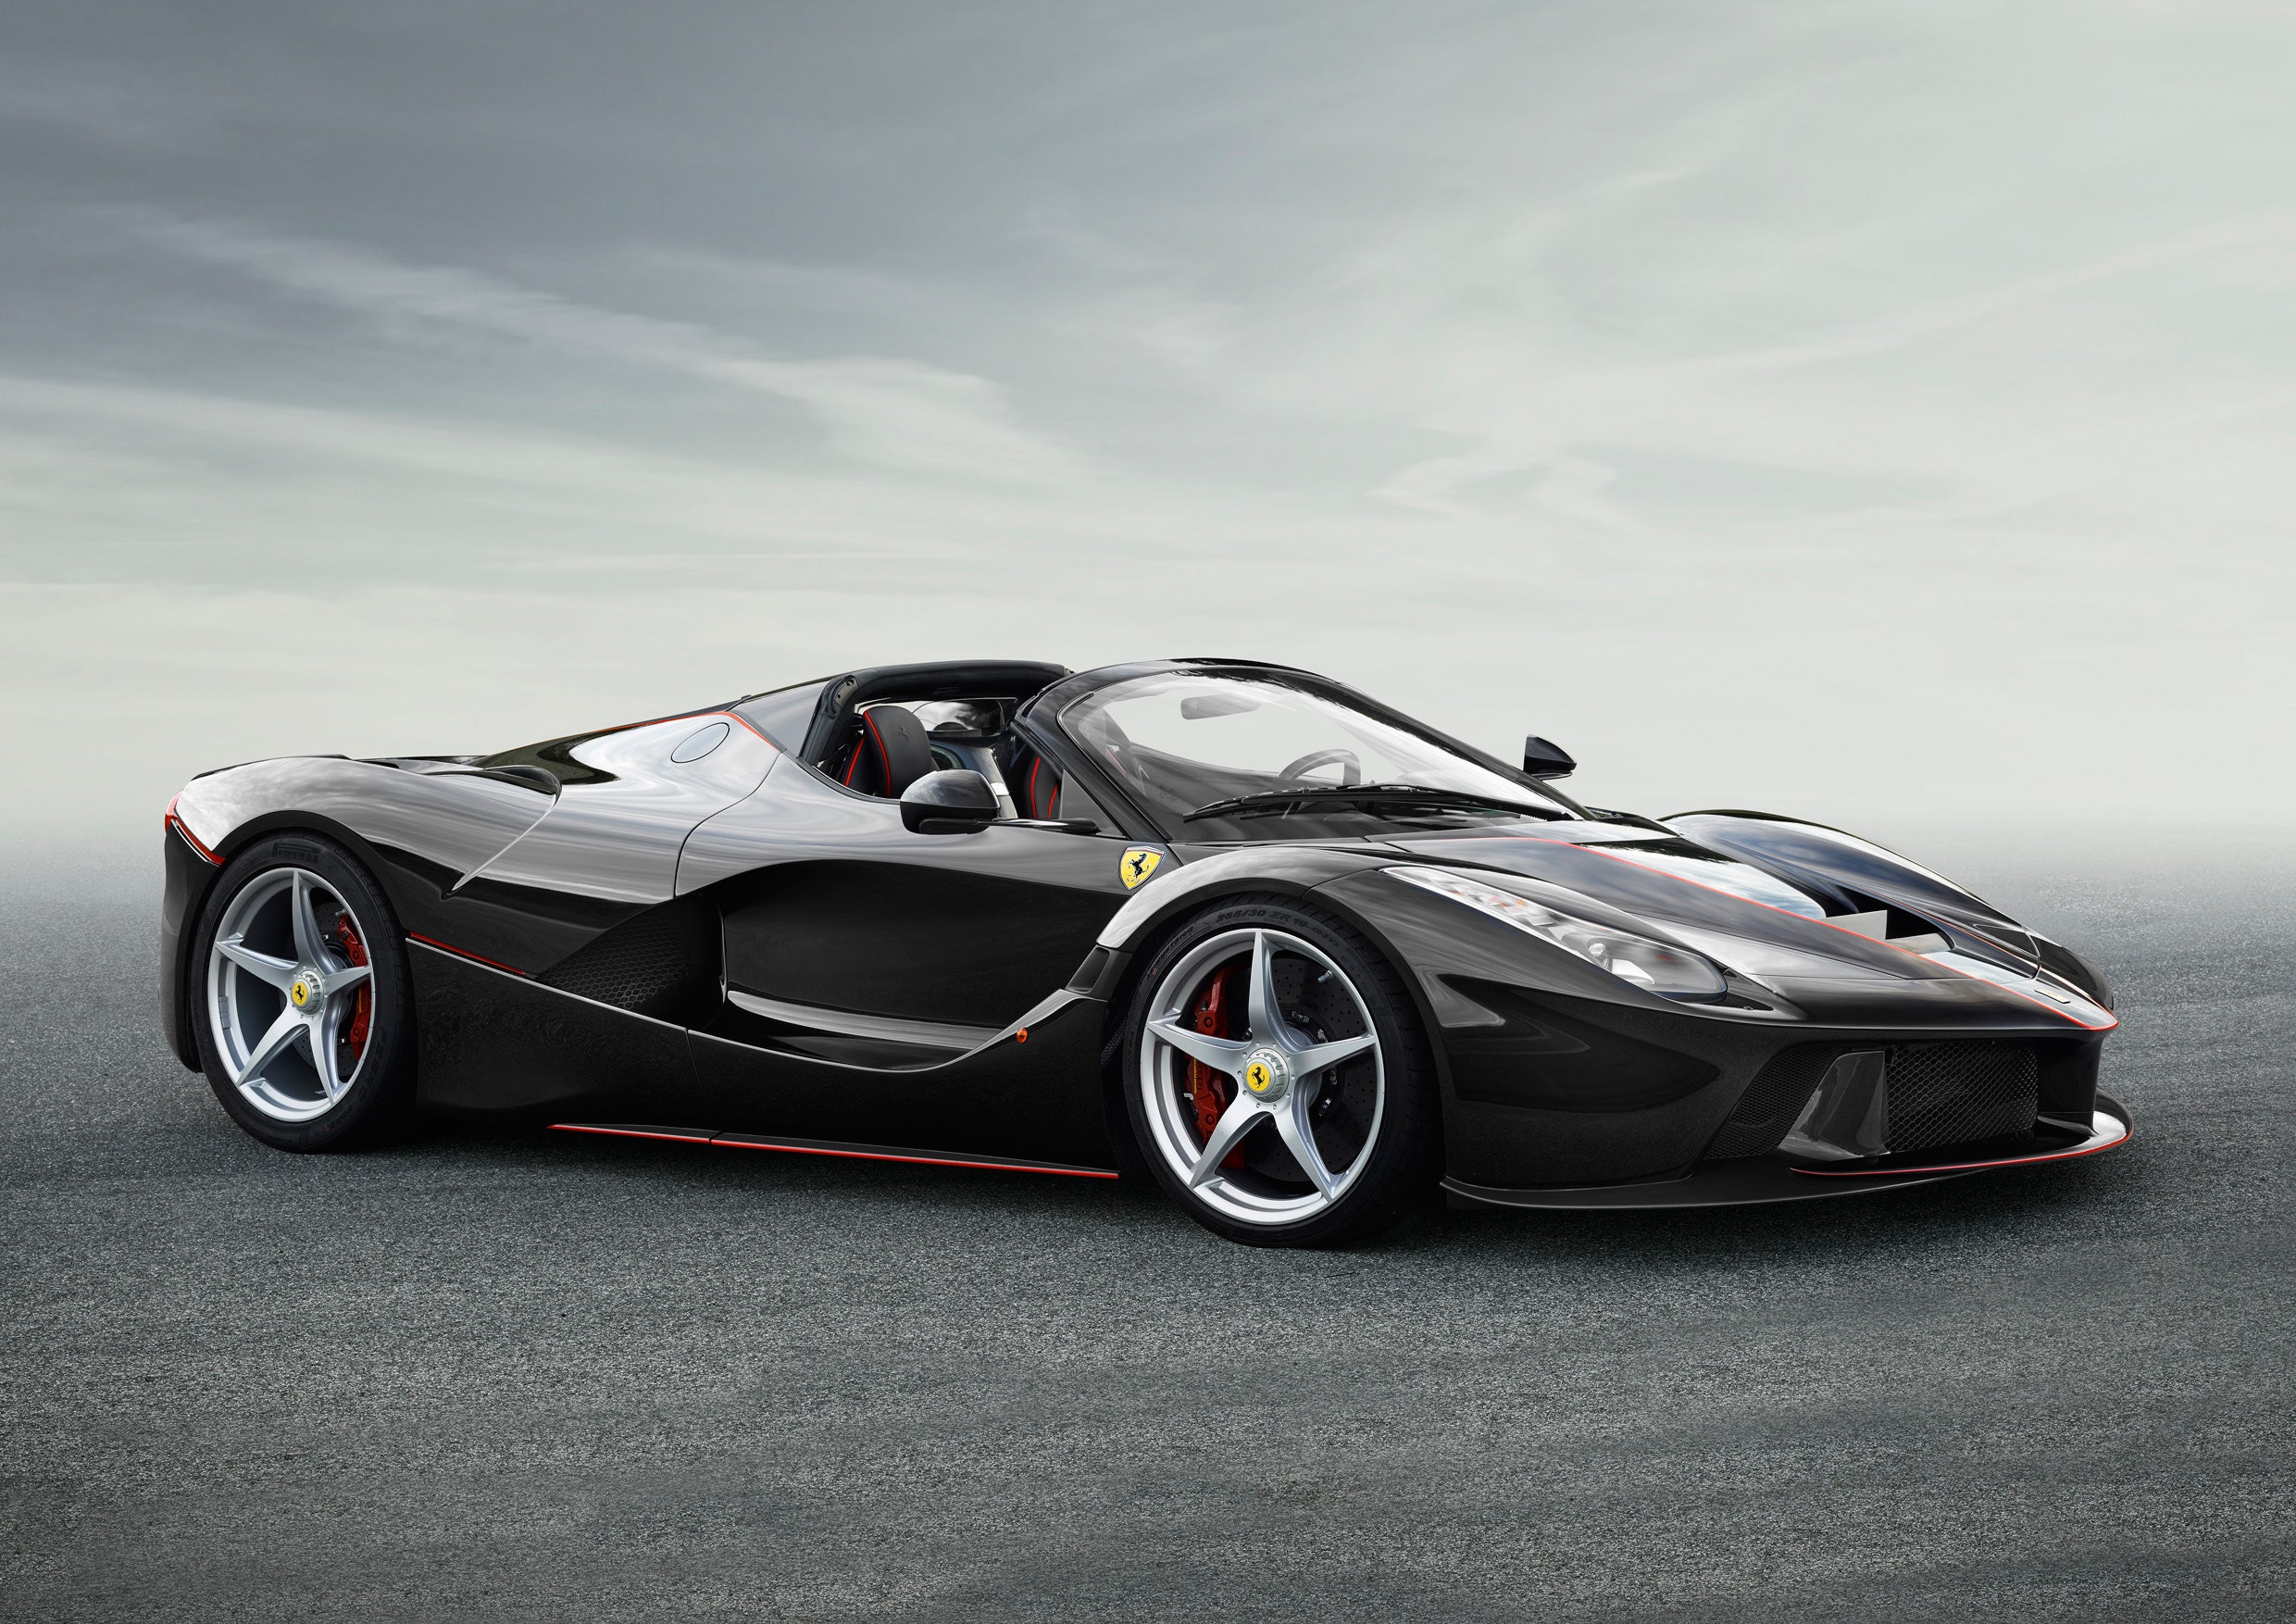 The LaFerrari Supercar Convertible Is the New Best Way to Burn $1M | WIRED